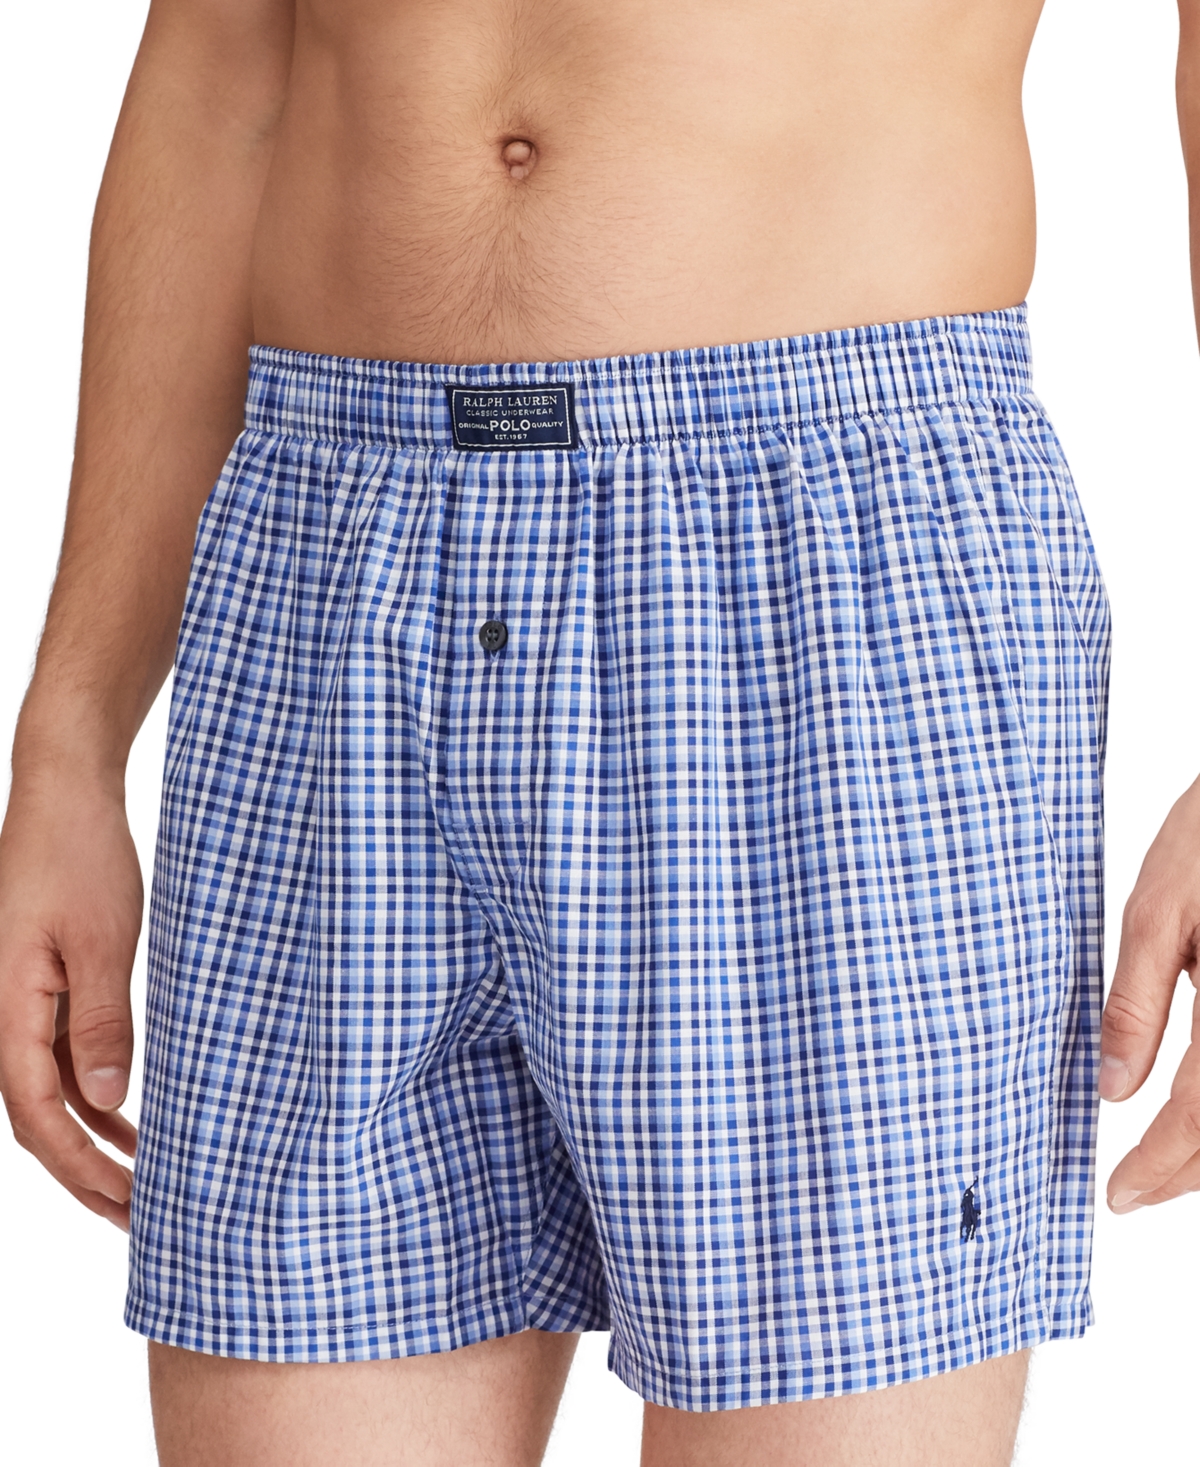 Colourful gingham loose boxer, Polo Ralph Lauren